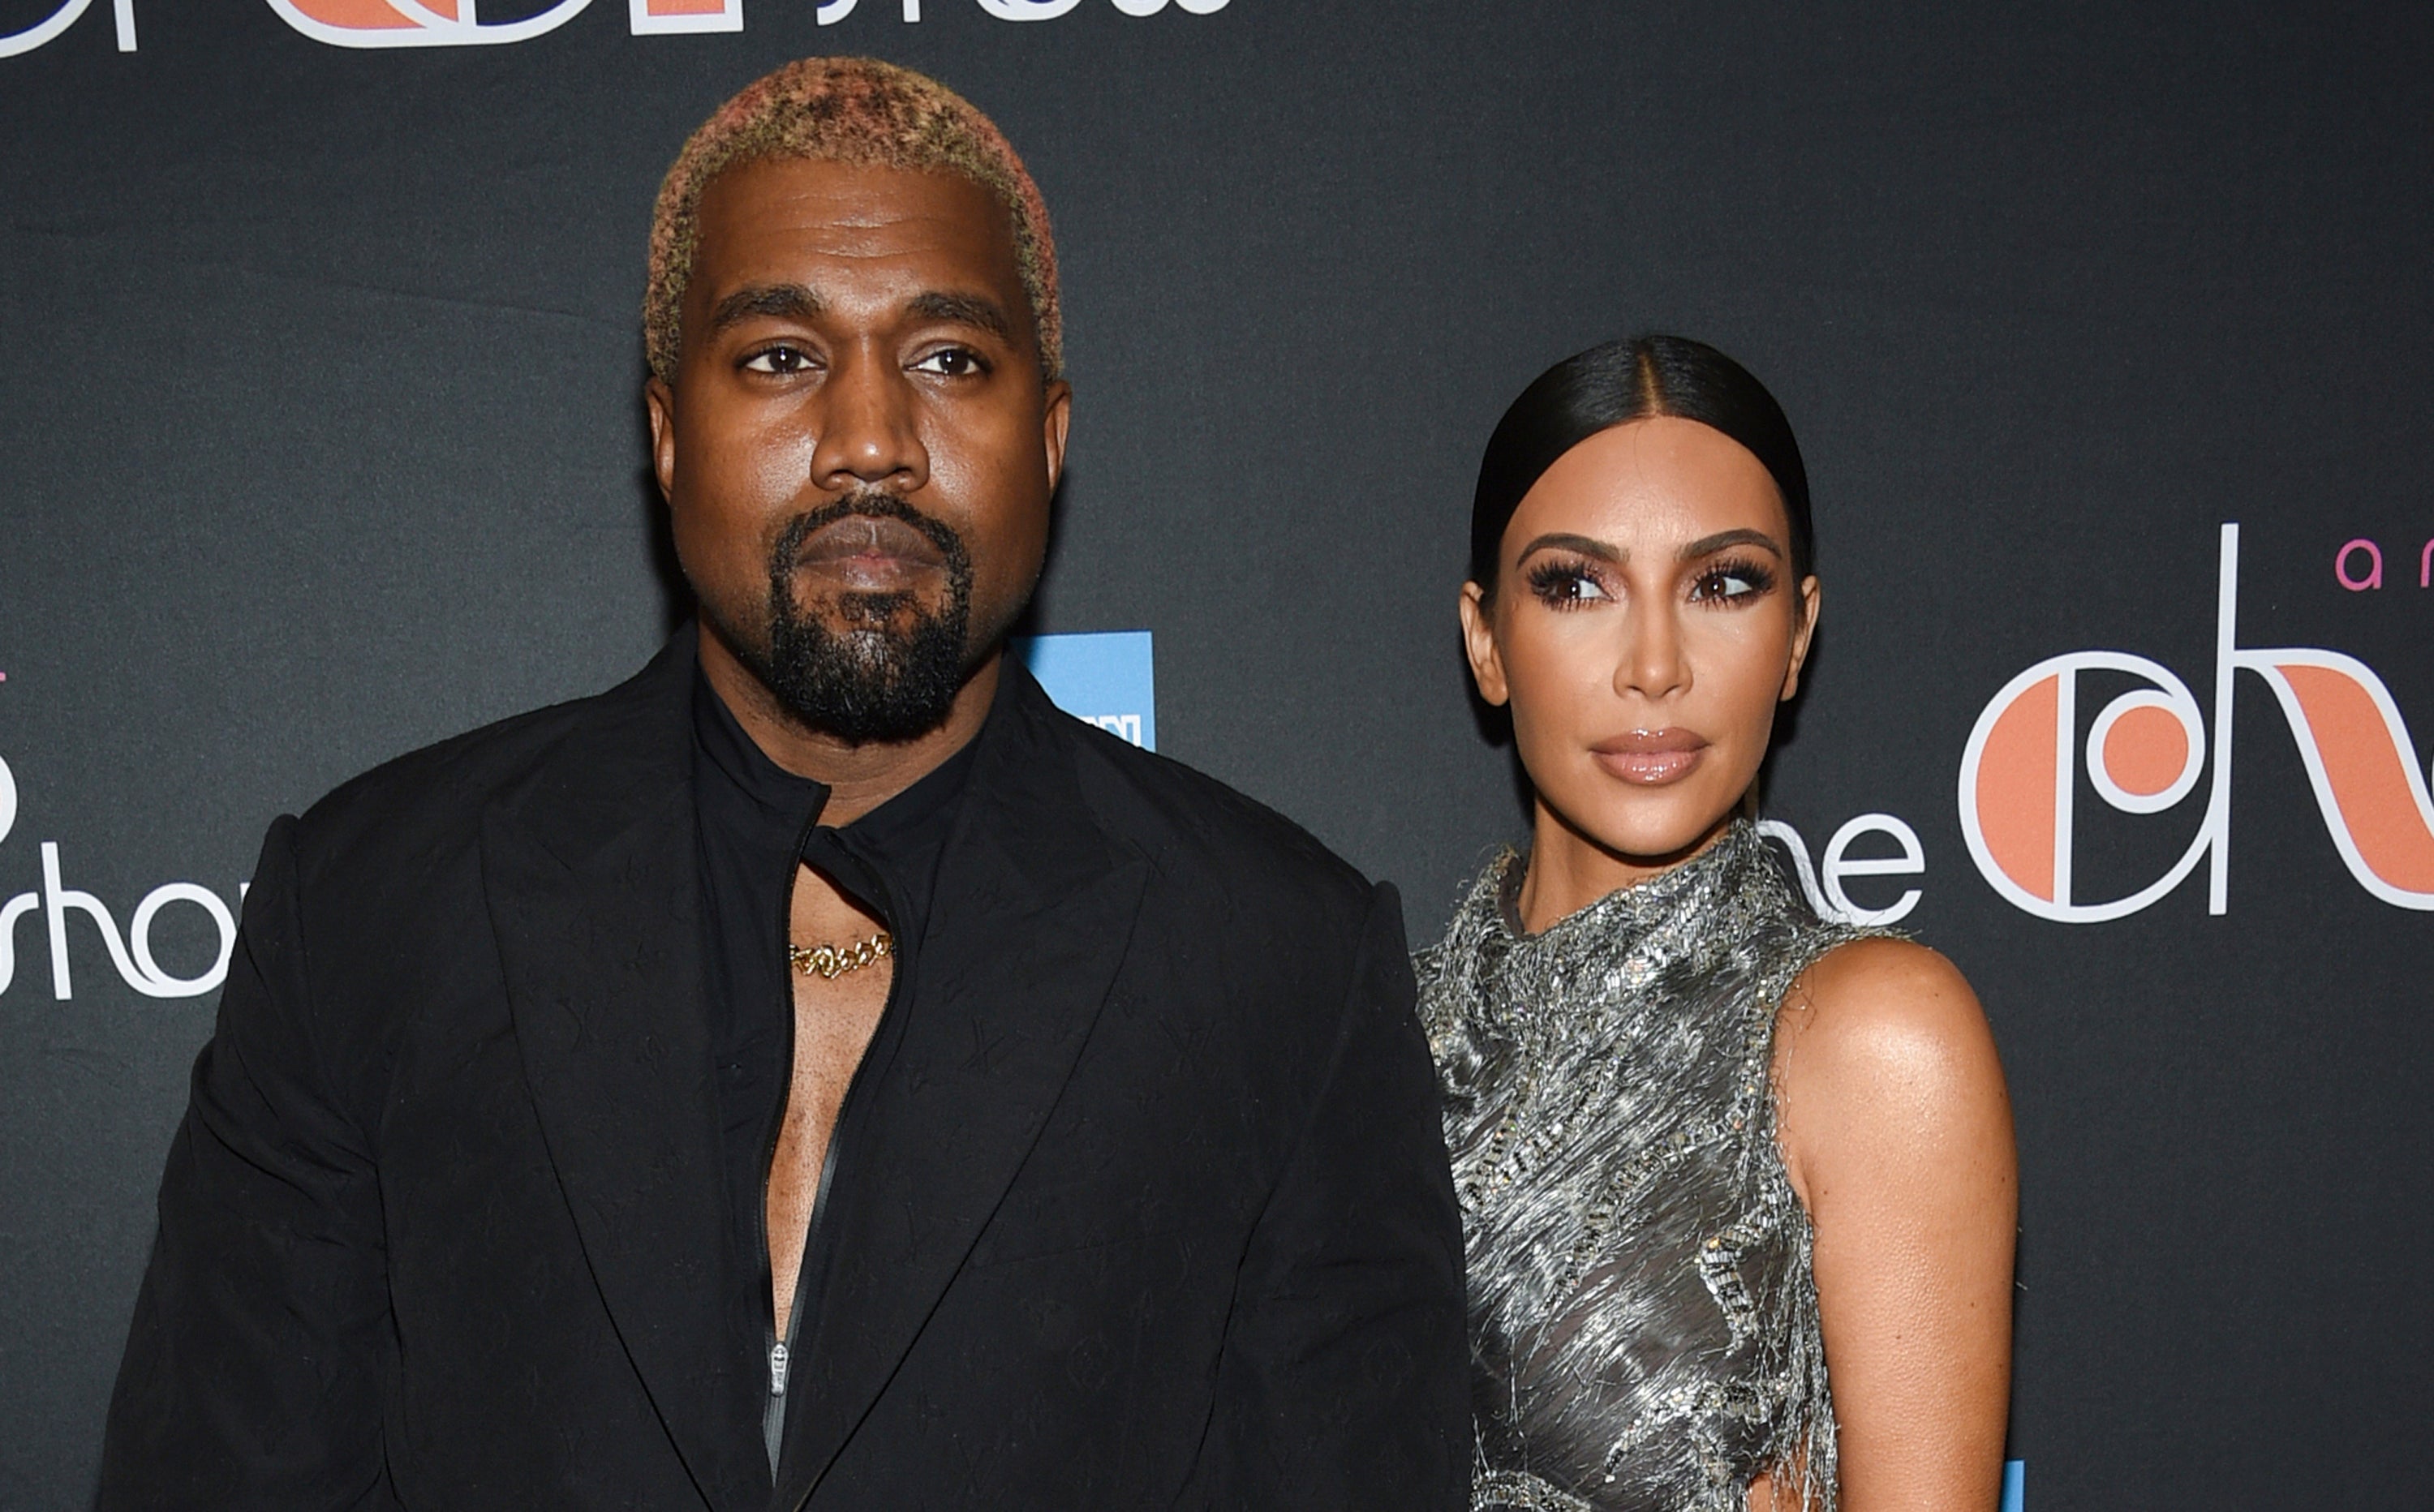 Kim Kardashian and Kanye West went through a highly publicised divorce